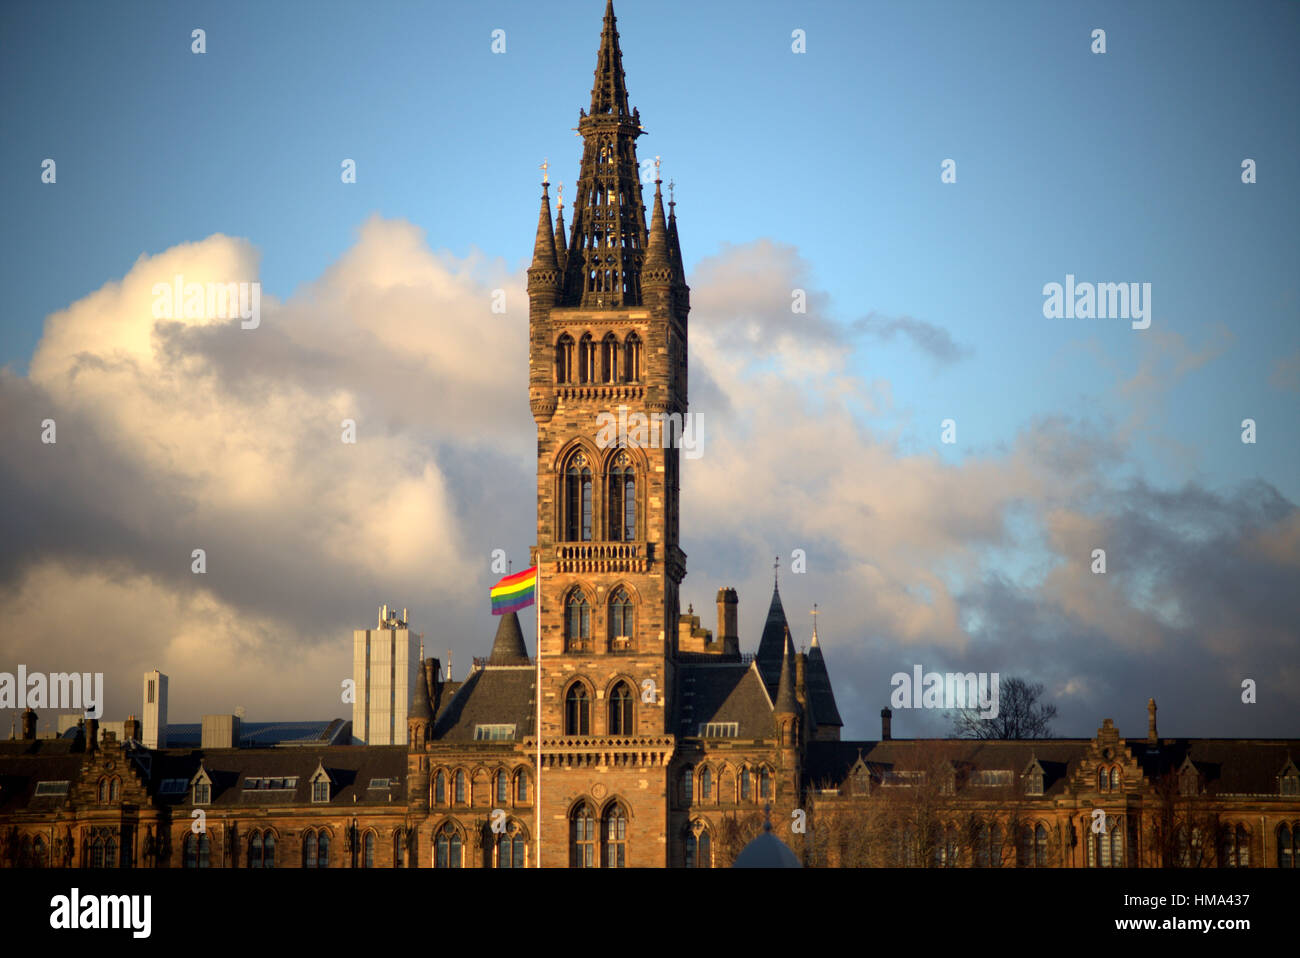 Glasgow, Scotland, Uk 1st February Glasgow University once more is raising the Rainbow Flag in celebration of LGBT History Month. The large Rainbow Flag will be flown for the first week on the main South Front flag pole which gives it great exposure. Credit: Gerard Ferry/Alamy Live News Stock Photo